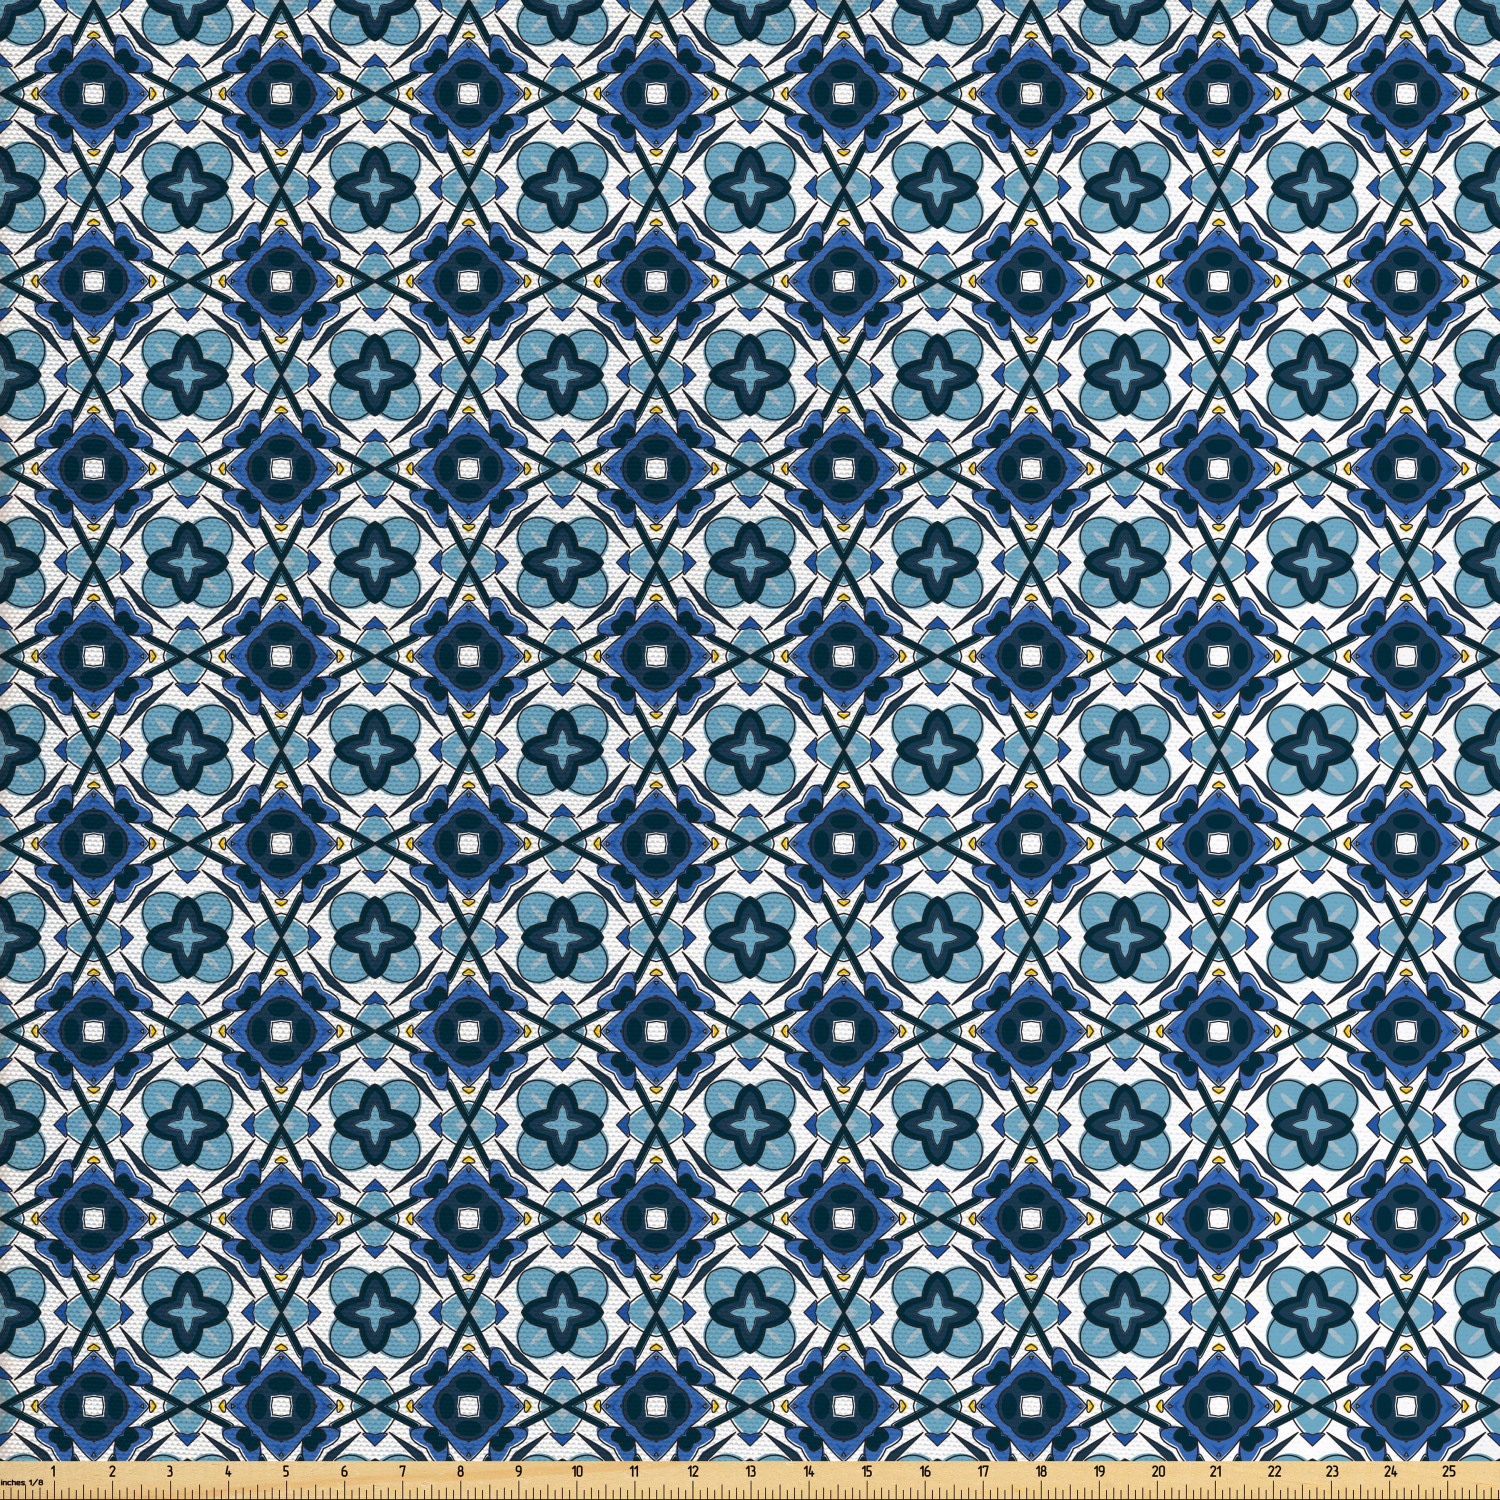 Traditional Fabric by the Yard Upholstery, Abstract Portuguese Mosaic Azulejo Tiles Spanish Cultural Heritage, Decorative Fabric for DIY and Home Accents, Multicolor by Ambesonne - image 1 of 4